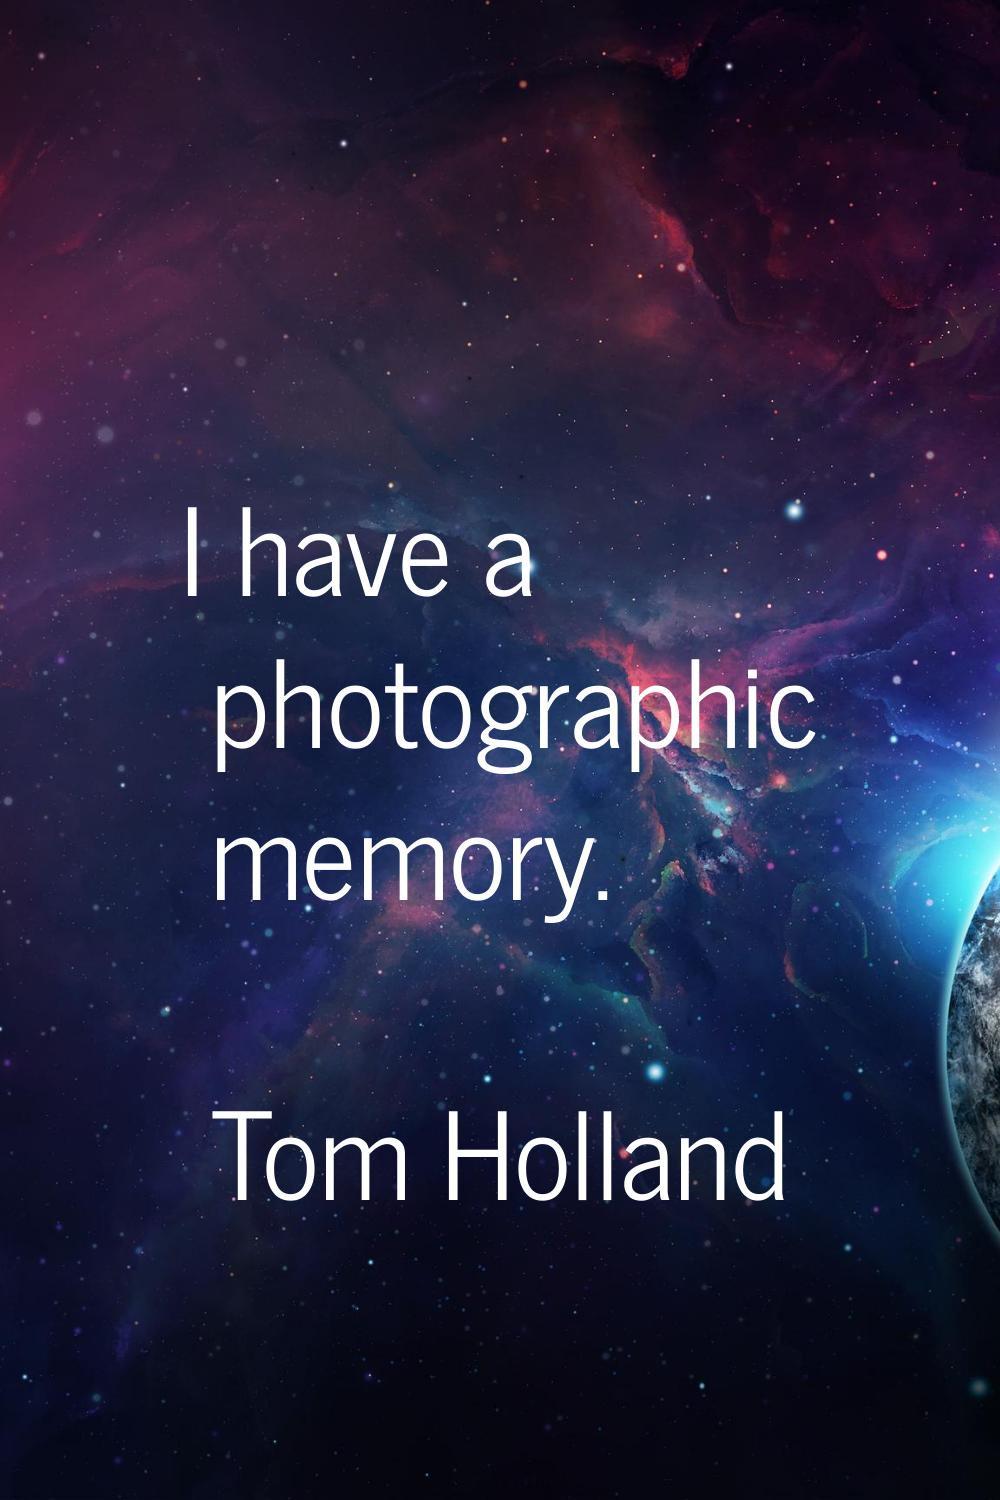 I have a photographic memory.